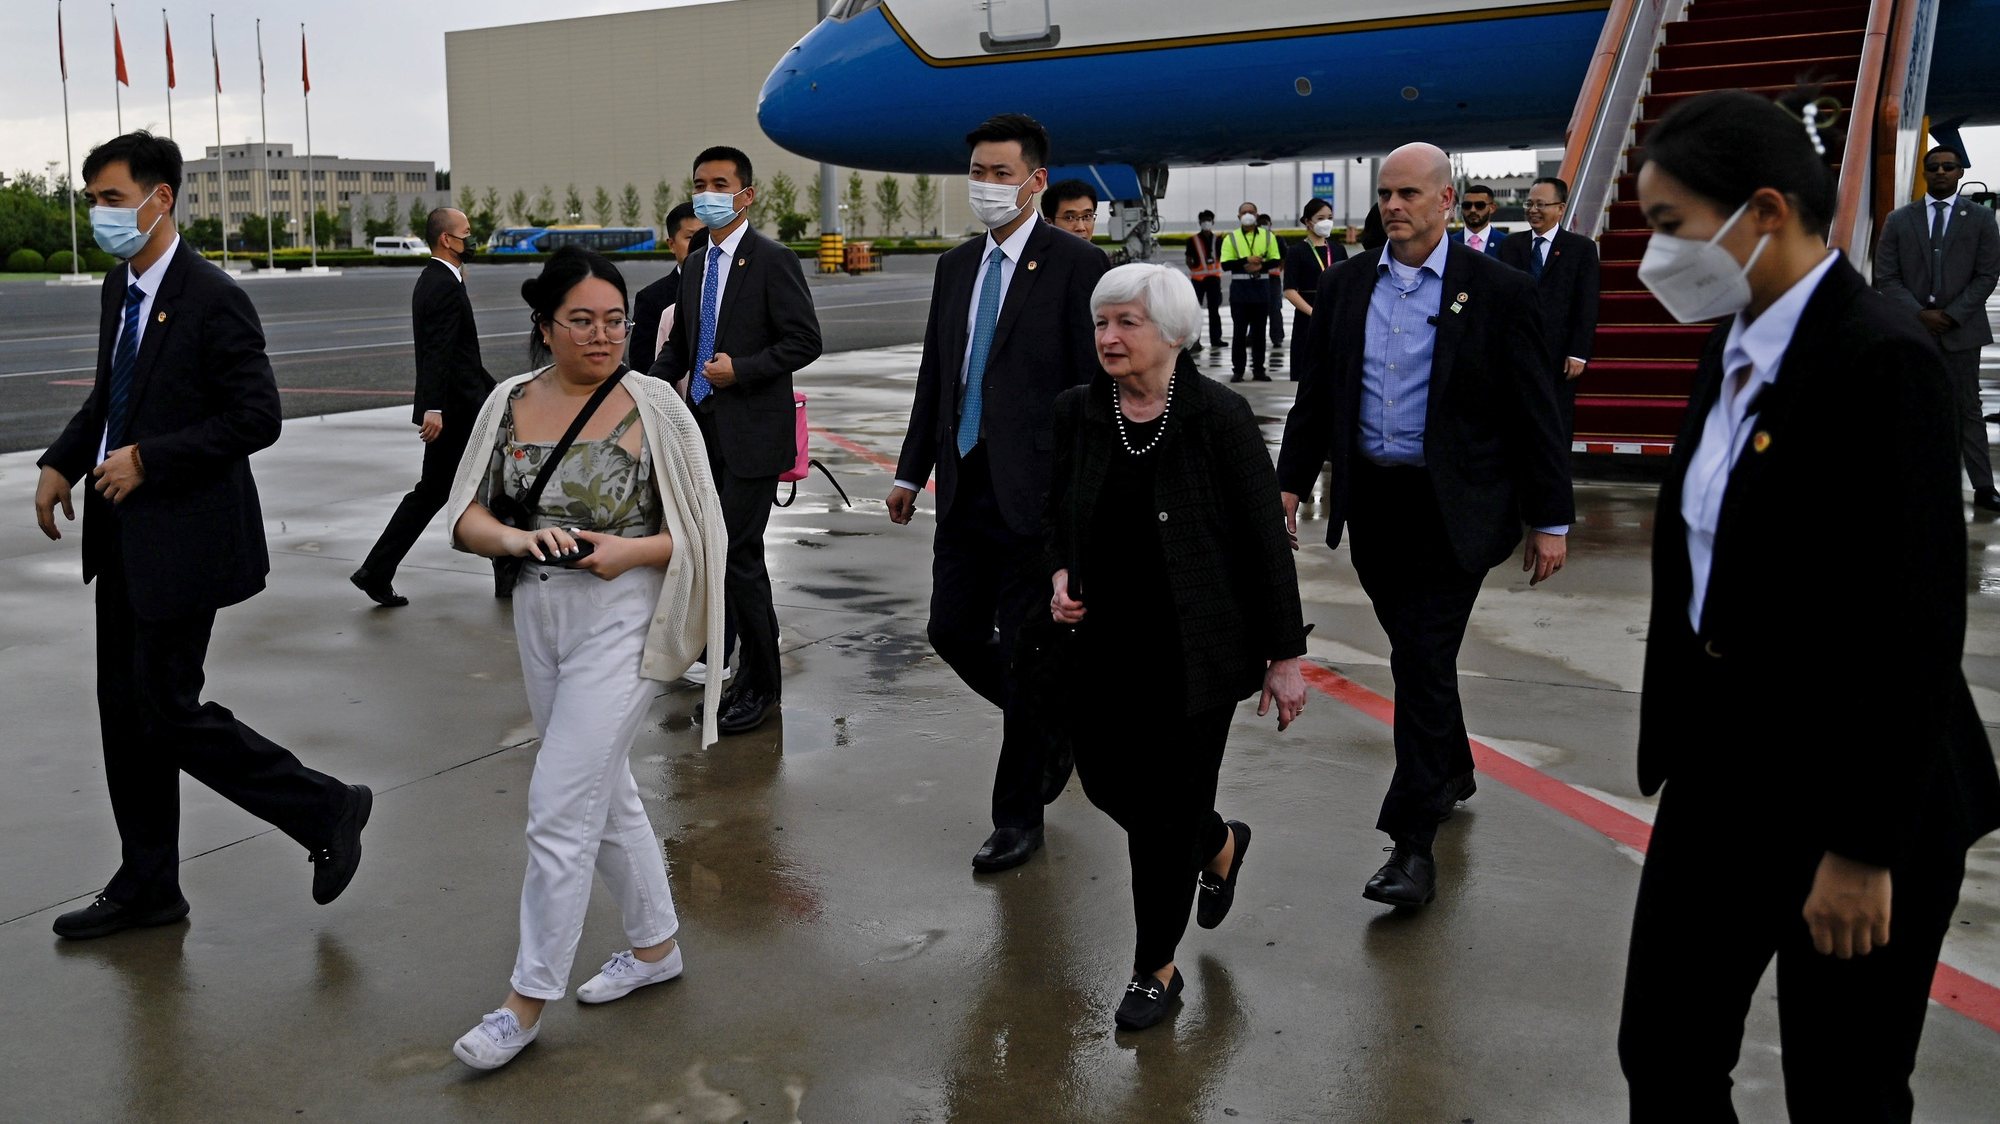 epa10729194 U.S. Treasury Secretary Janet Yellen (C) is accompanied by officials and security personnel as she arrives at Beijing Capital International Airport in Beijing, China, 06 July 2023. Secretary of the Treasury Janet L. Yellen travels to Beijing from 06 to 09 July for meetings with senior Chinese officials, the U.S. Treasury announced.  EPA/Pedro PARDO / POOL